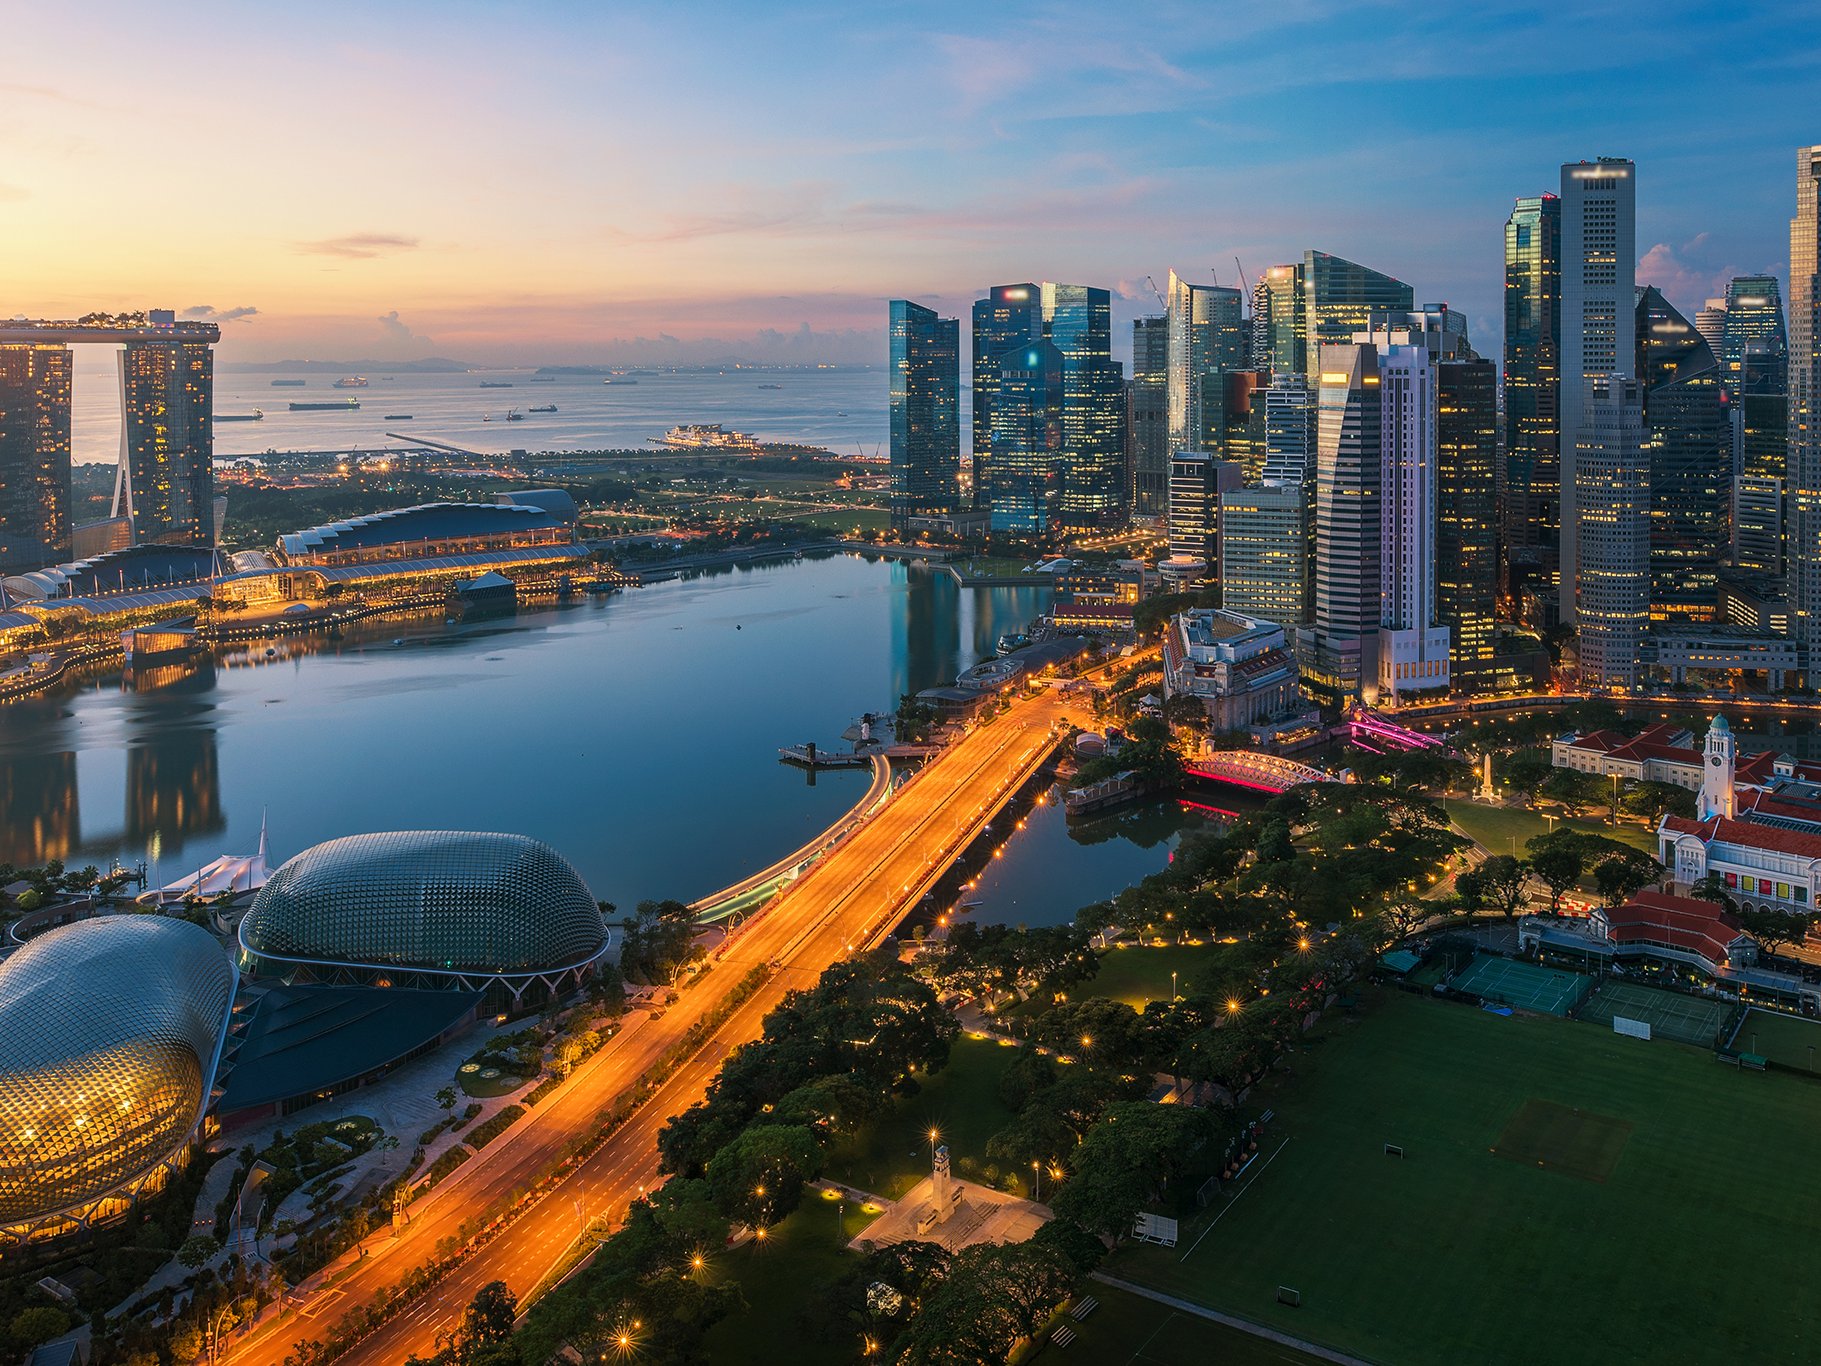 Aerial view of Singapore business district and city at twilight in Singapore, Asia.